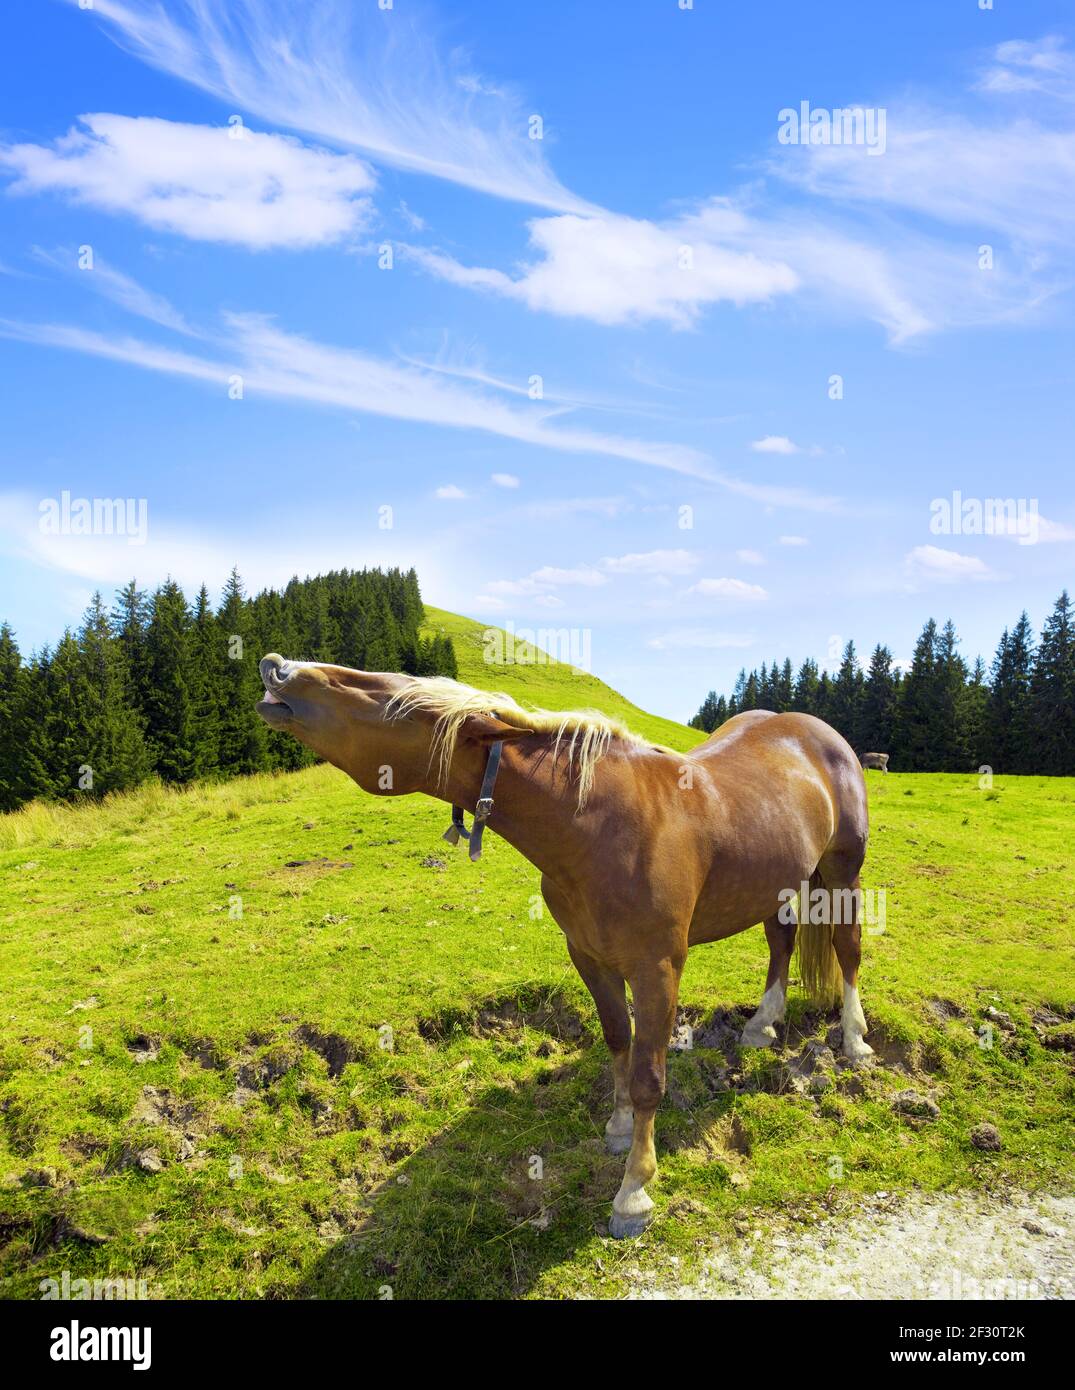 Neighing horse on the pasture in the mountains Stock Photo